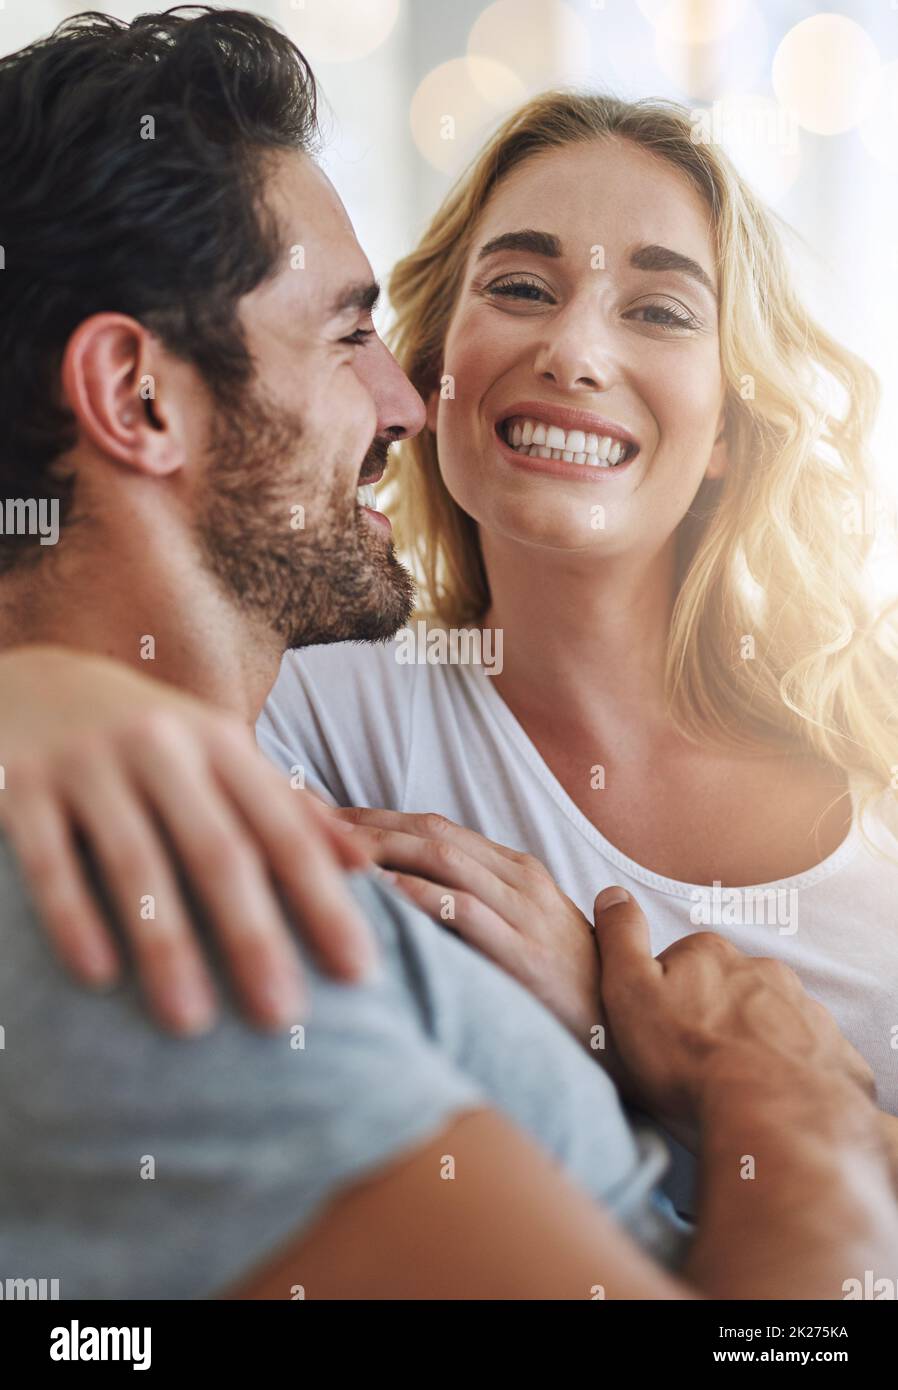 My hubby makes me so happy. Shot of a young couple relaxing at home. Stock Photo